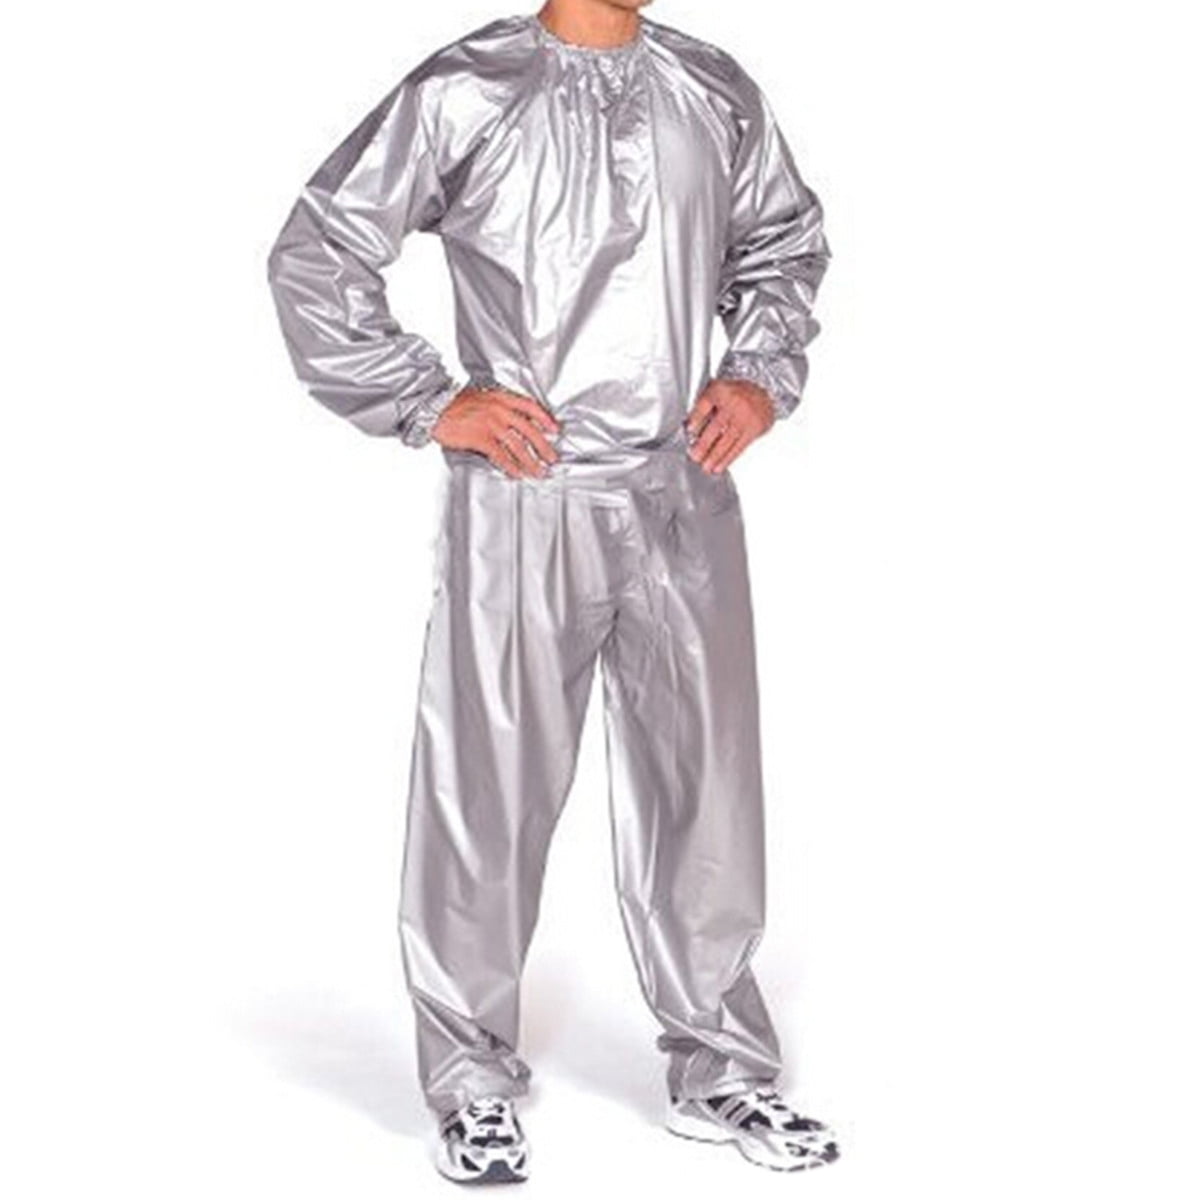 Heavy Duty Sweat Sauna Suit Exercise Gym suit Fitness Weight Loss Anti-Rip 